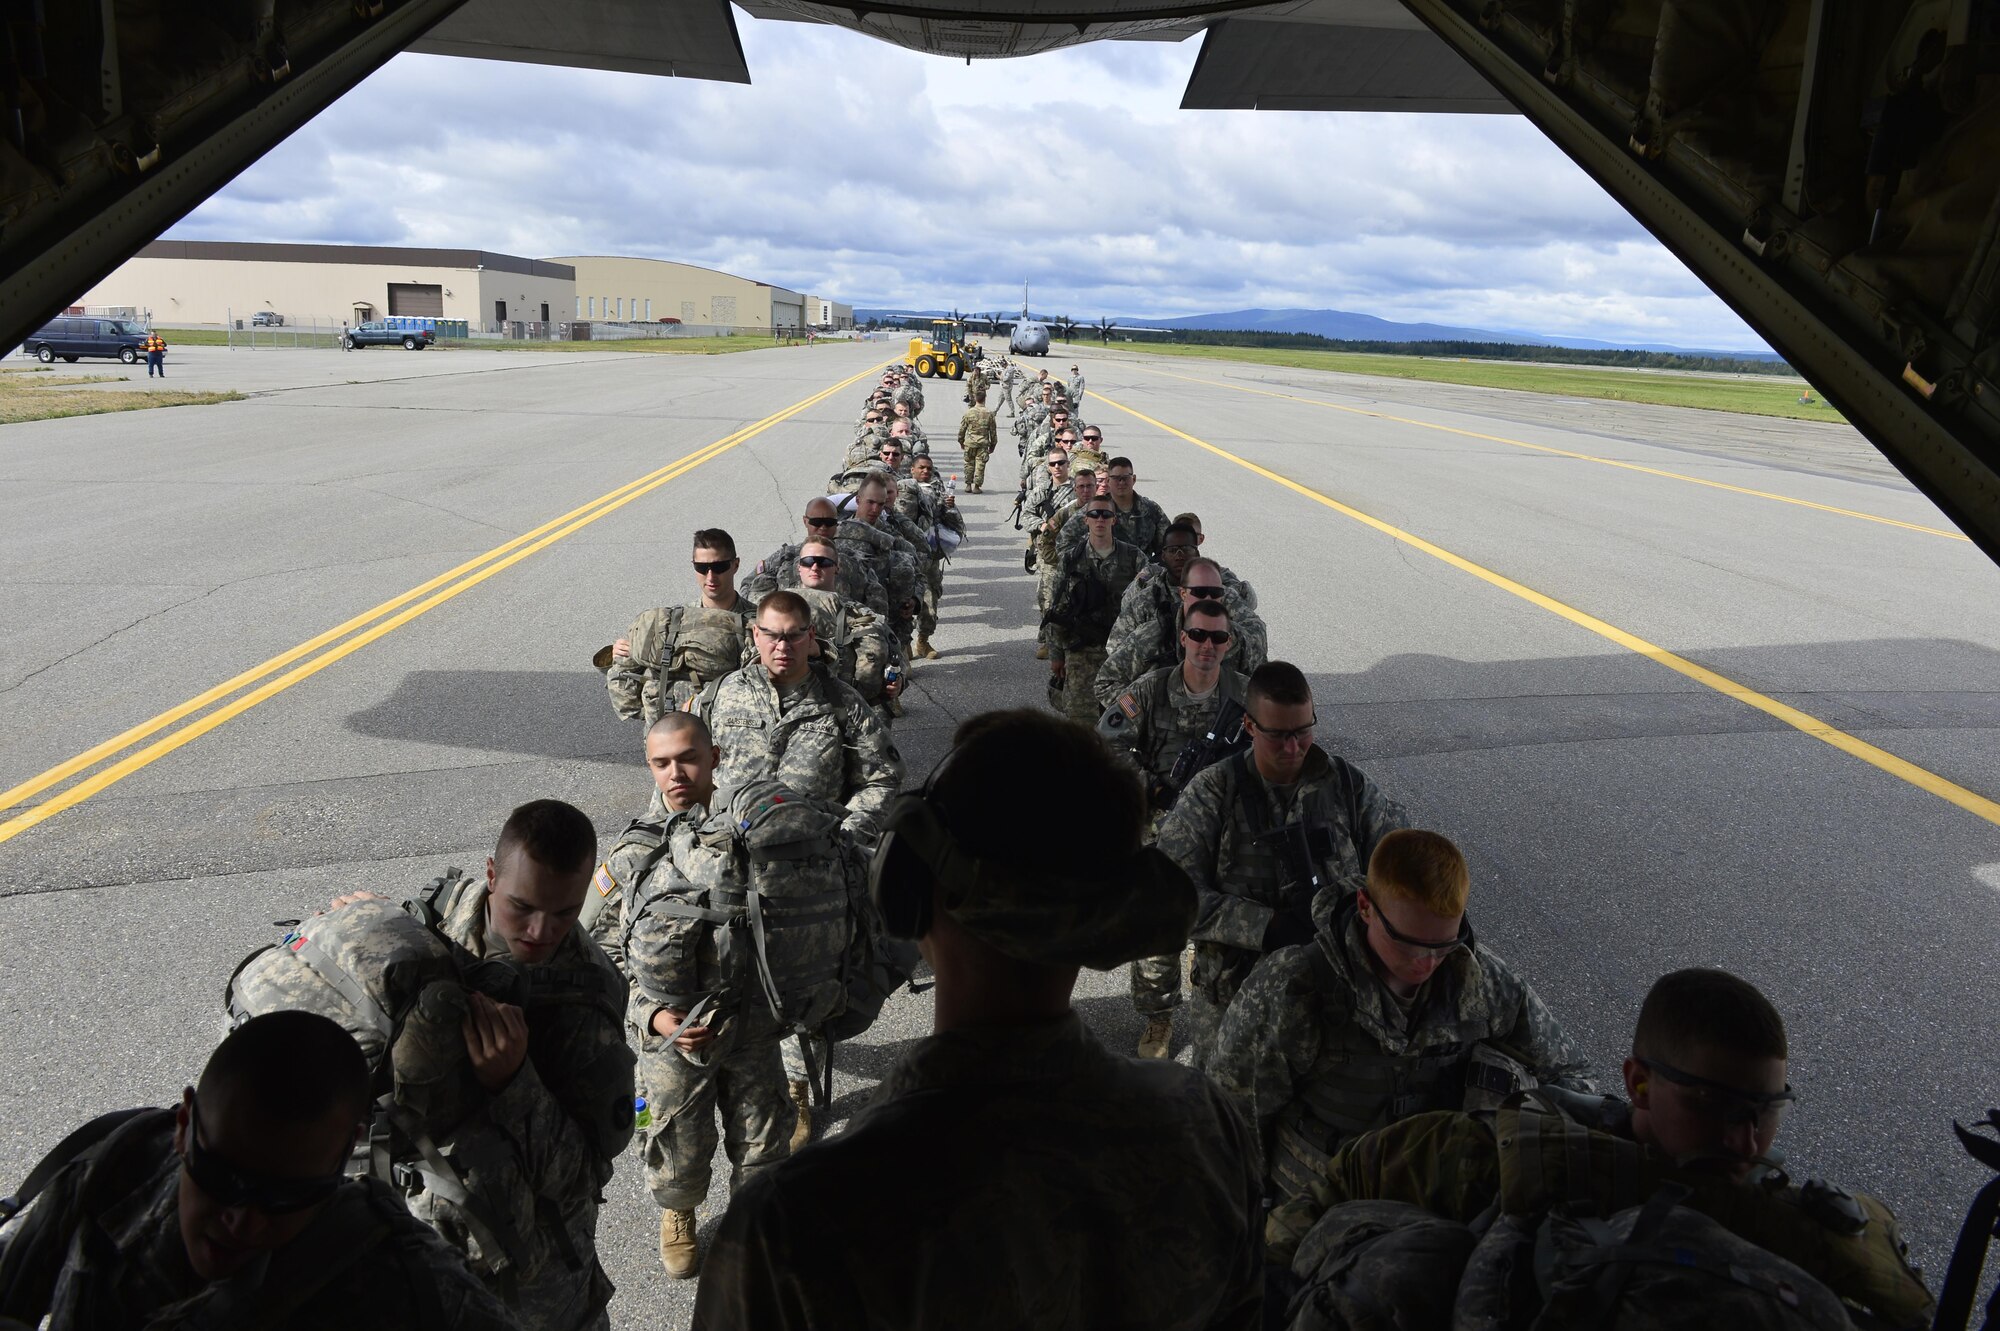 U.S Army Soldiers board a C-130J from the 41st Airlift Squadron and are later inserted into a simulated forward operating base in Alaska to provide realistic conditions in deployed locations on July 20, 2016. Arctic Anvil is an integrated combined, joint and coalition training event integrating the U.S Air Force, U.S. Army Alaska, Alaska National Guard, Iowa National Guard, 196th Infantry Brigade and the Canadian military. (U.S. Air Force photo by Senior Airman Kaylee Clark)